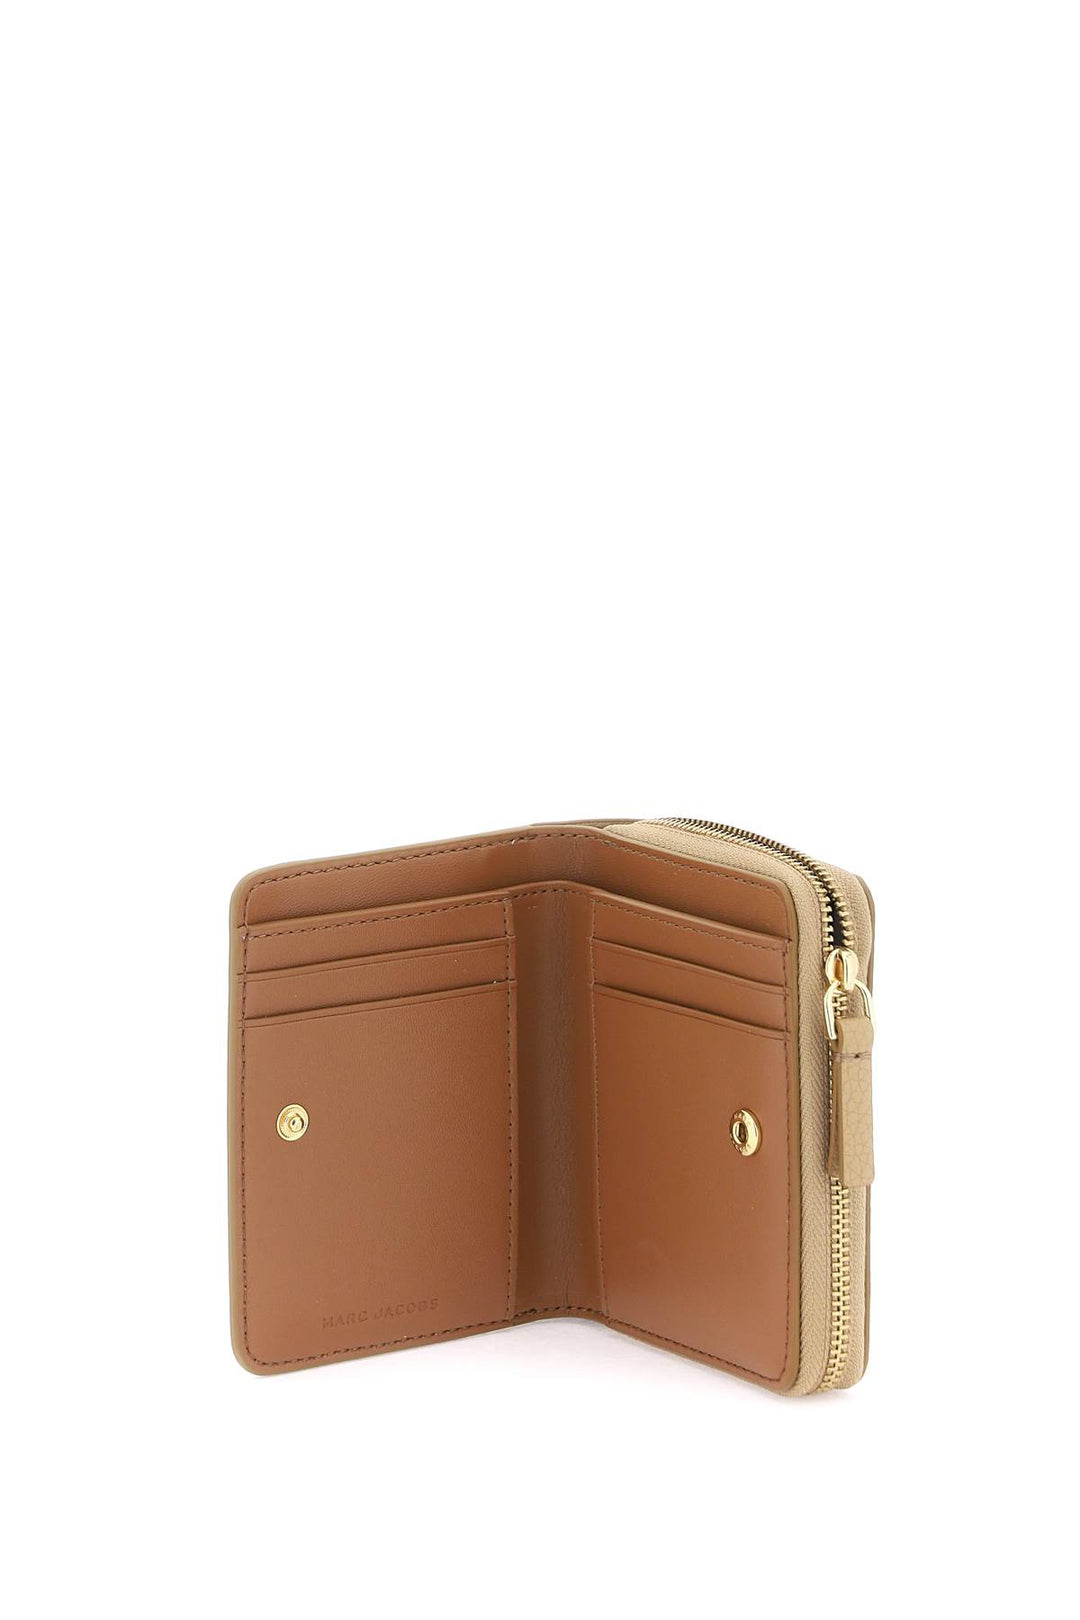 Marc Jacobs The Leather Mini Compact Wallet   Beige